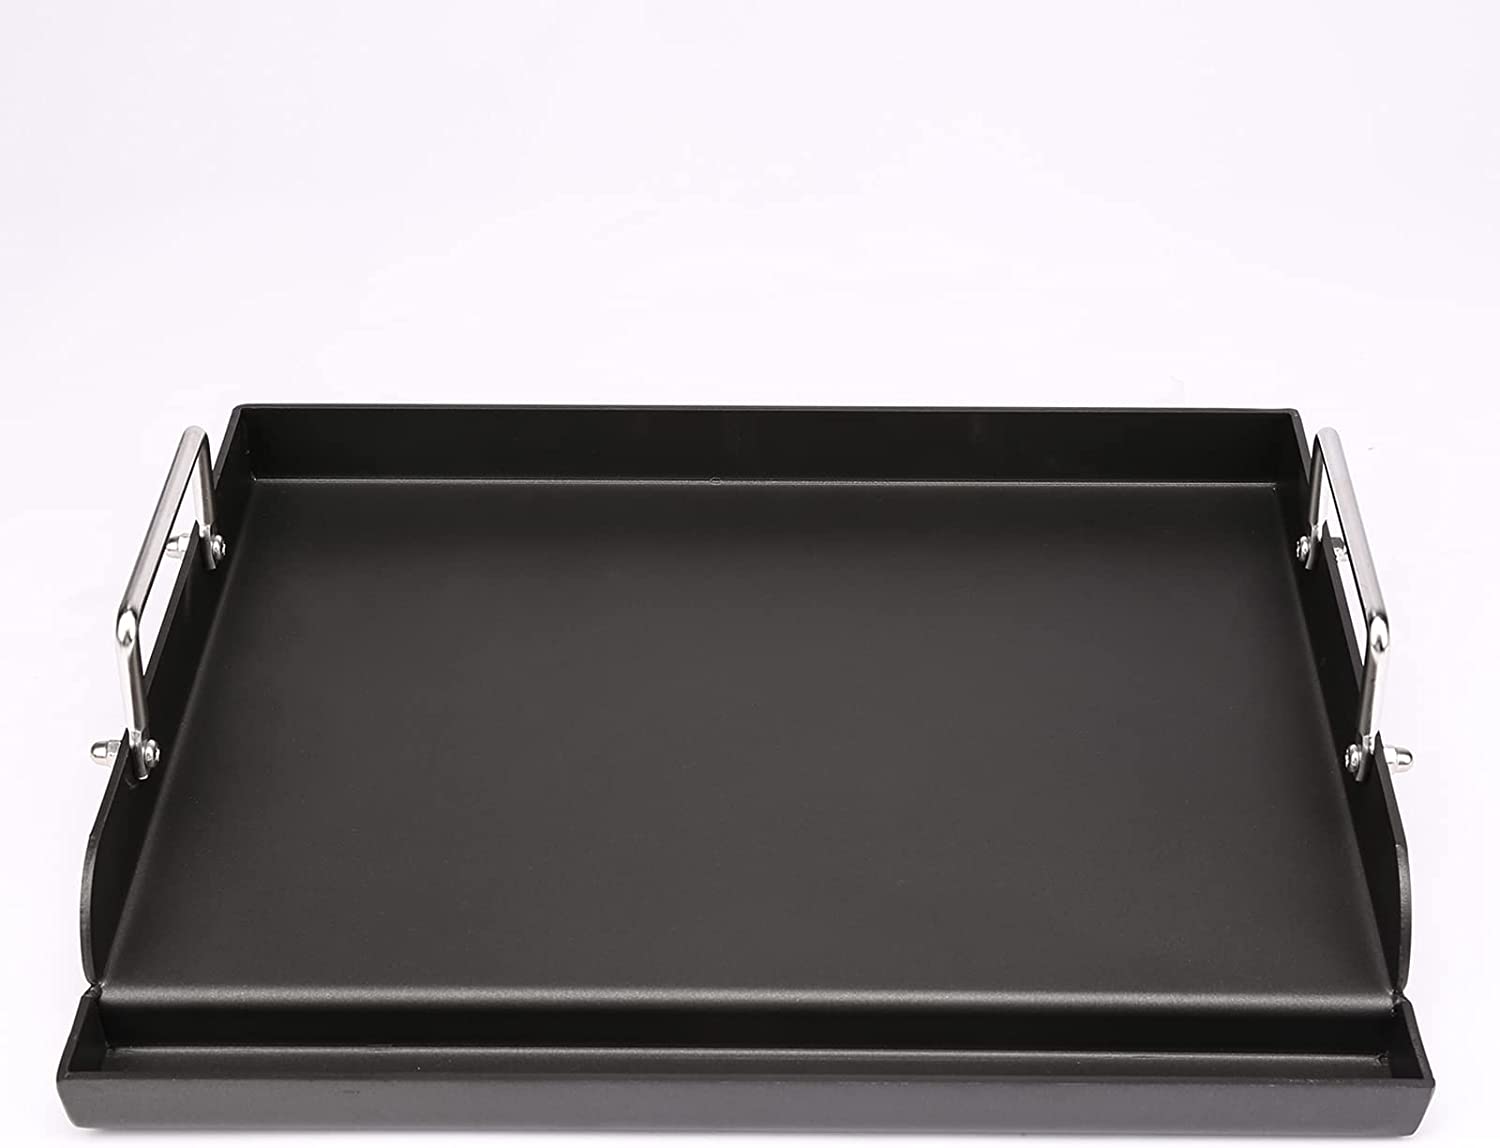 Nonstick Coating Cooking Griddle for GAS Grill, 25x16” Griddle Plate Insert for GAS Stove, Grills, Flat Griddle Top Plate for Grilling